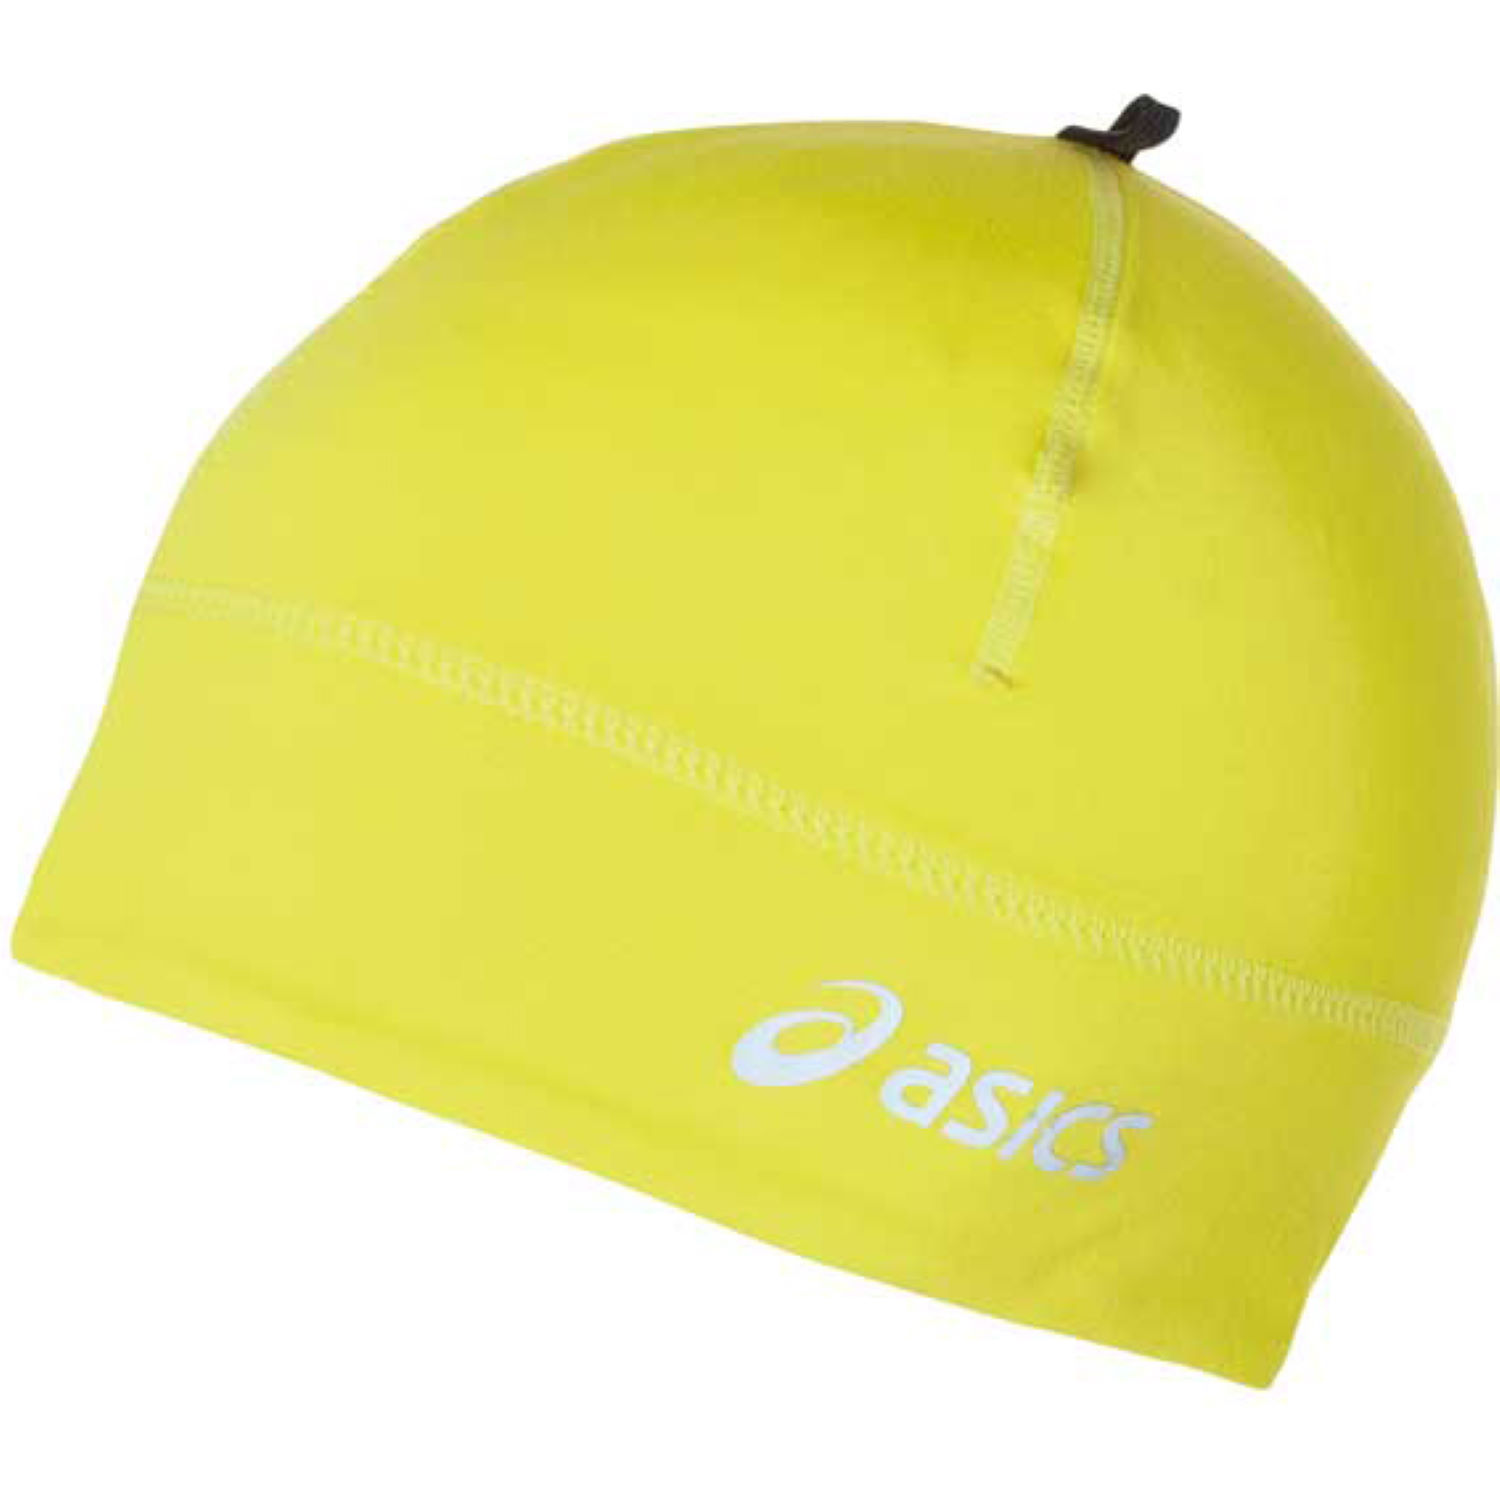 Asics Thermal Hat Safety Yellow 56cm